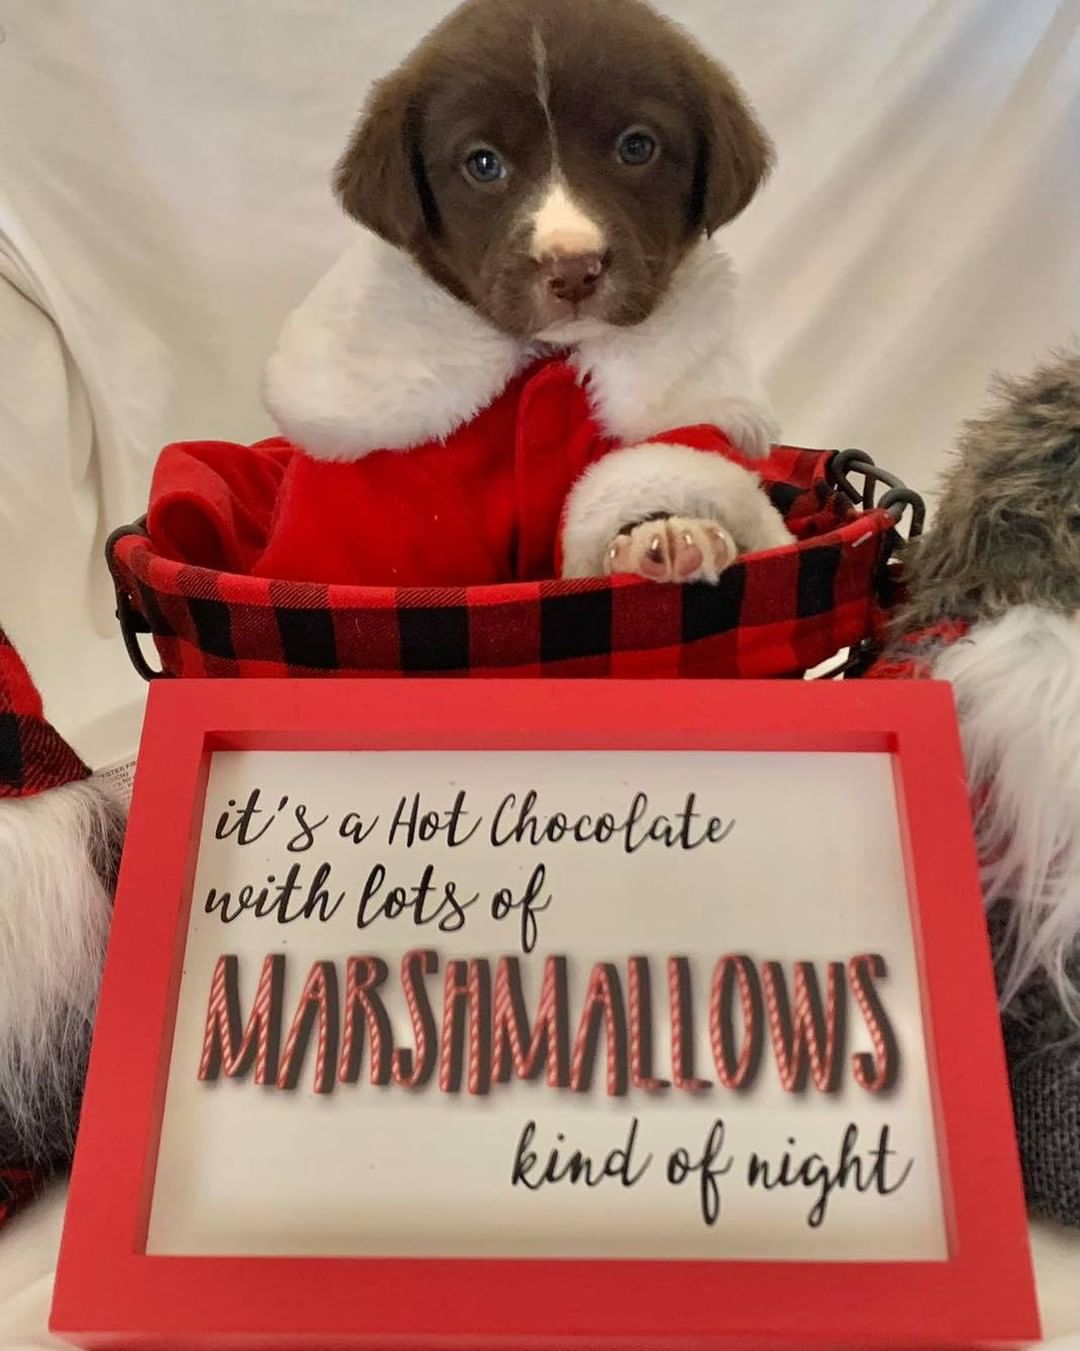 Are our fosters good sports or what 🥰 from a last minute “would you be mad if I was headed your way with 7 puppies” phone call, all the way to the themed photo shoot for their introduction ❤️ 

Here are our “freeze warning pups”! The cold weather brought with it the thoughts of hot cocoa and the upcoming holiday season. So, meet Tinsel, Noel, Holly, Jingle, Nick, Mistletoe and Joy ❣️ These adorable, super cuddly lab mixes will be ready to accept applications around the first week in December, so keep your eyes on the website! And please share this post! Our adoptions have slowed drastically due to Facebook algorithms limiting our pages views 😞 these guys would love to spend the holidays in their forever homes 🏡

Www.releashatlanta.com